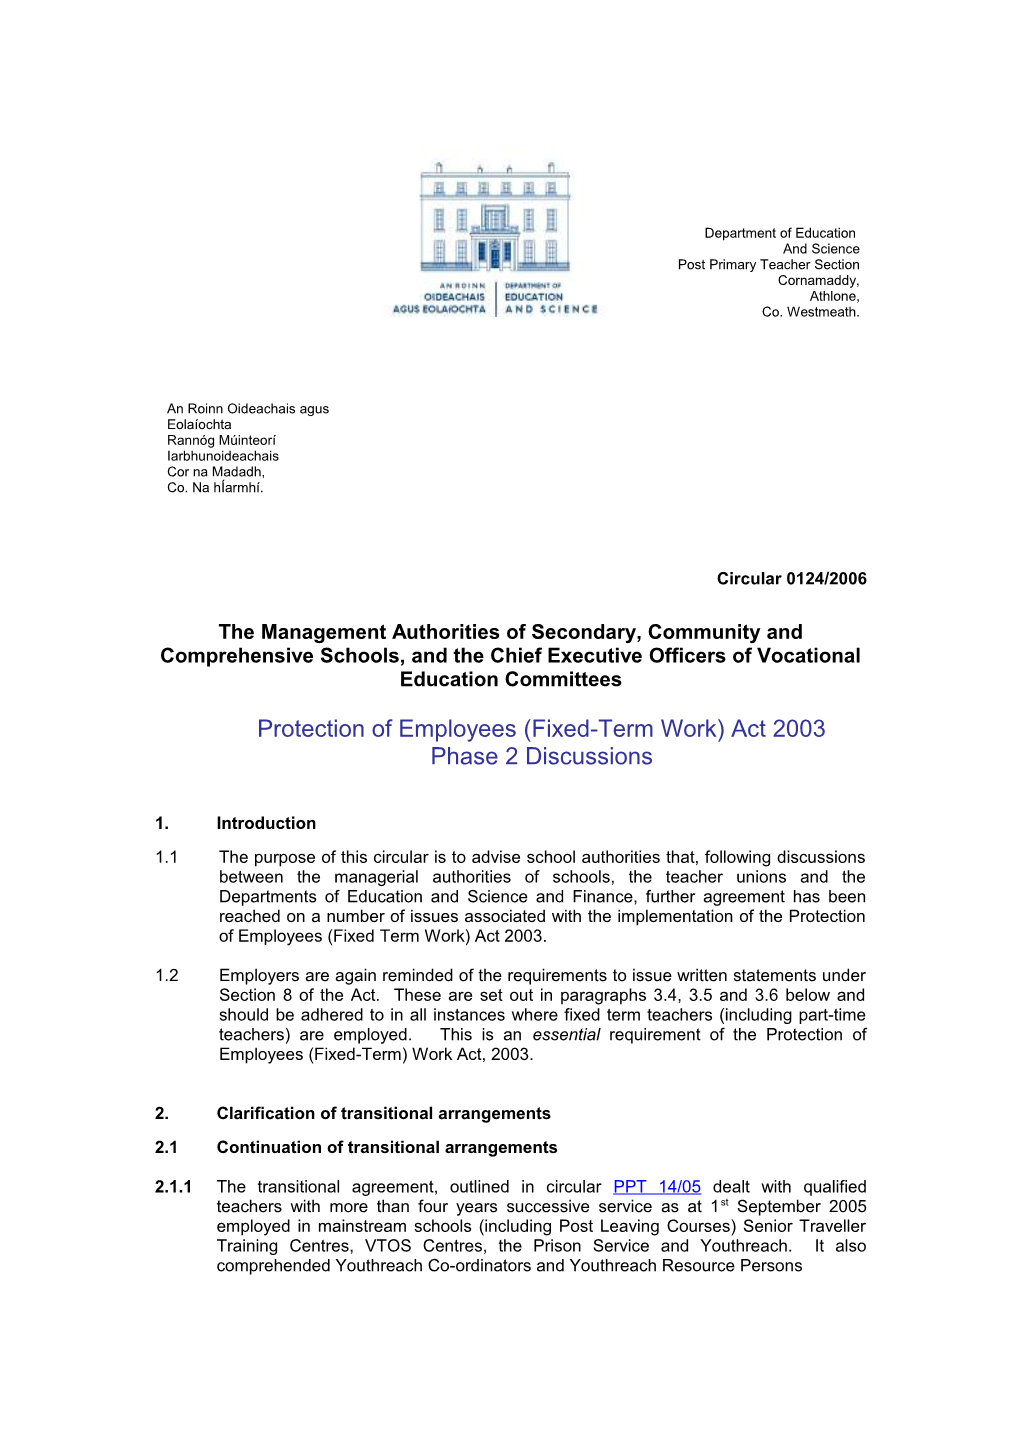 Circular 0124/2006 - Protection of Employees (Fixed-Term Work) Act 2003 - Phase 2 Discussions